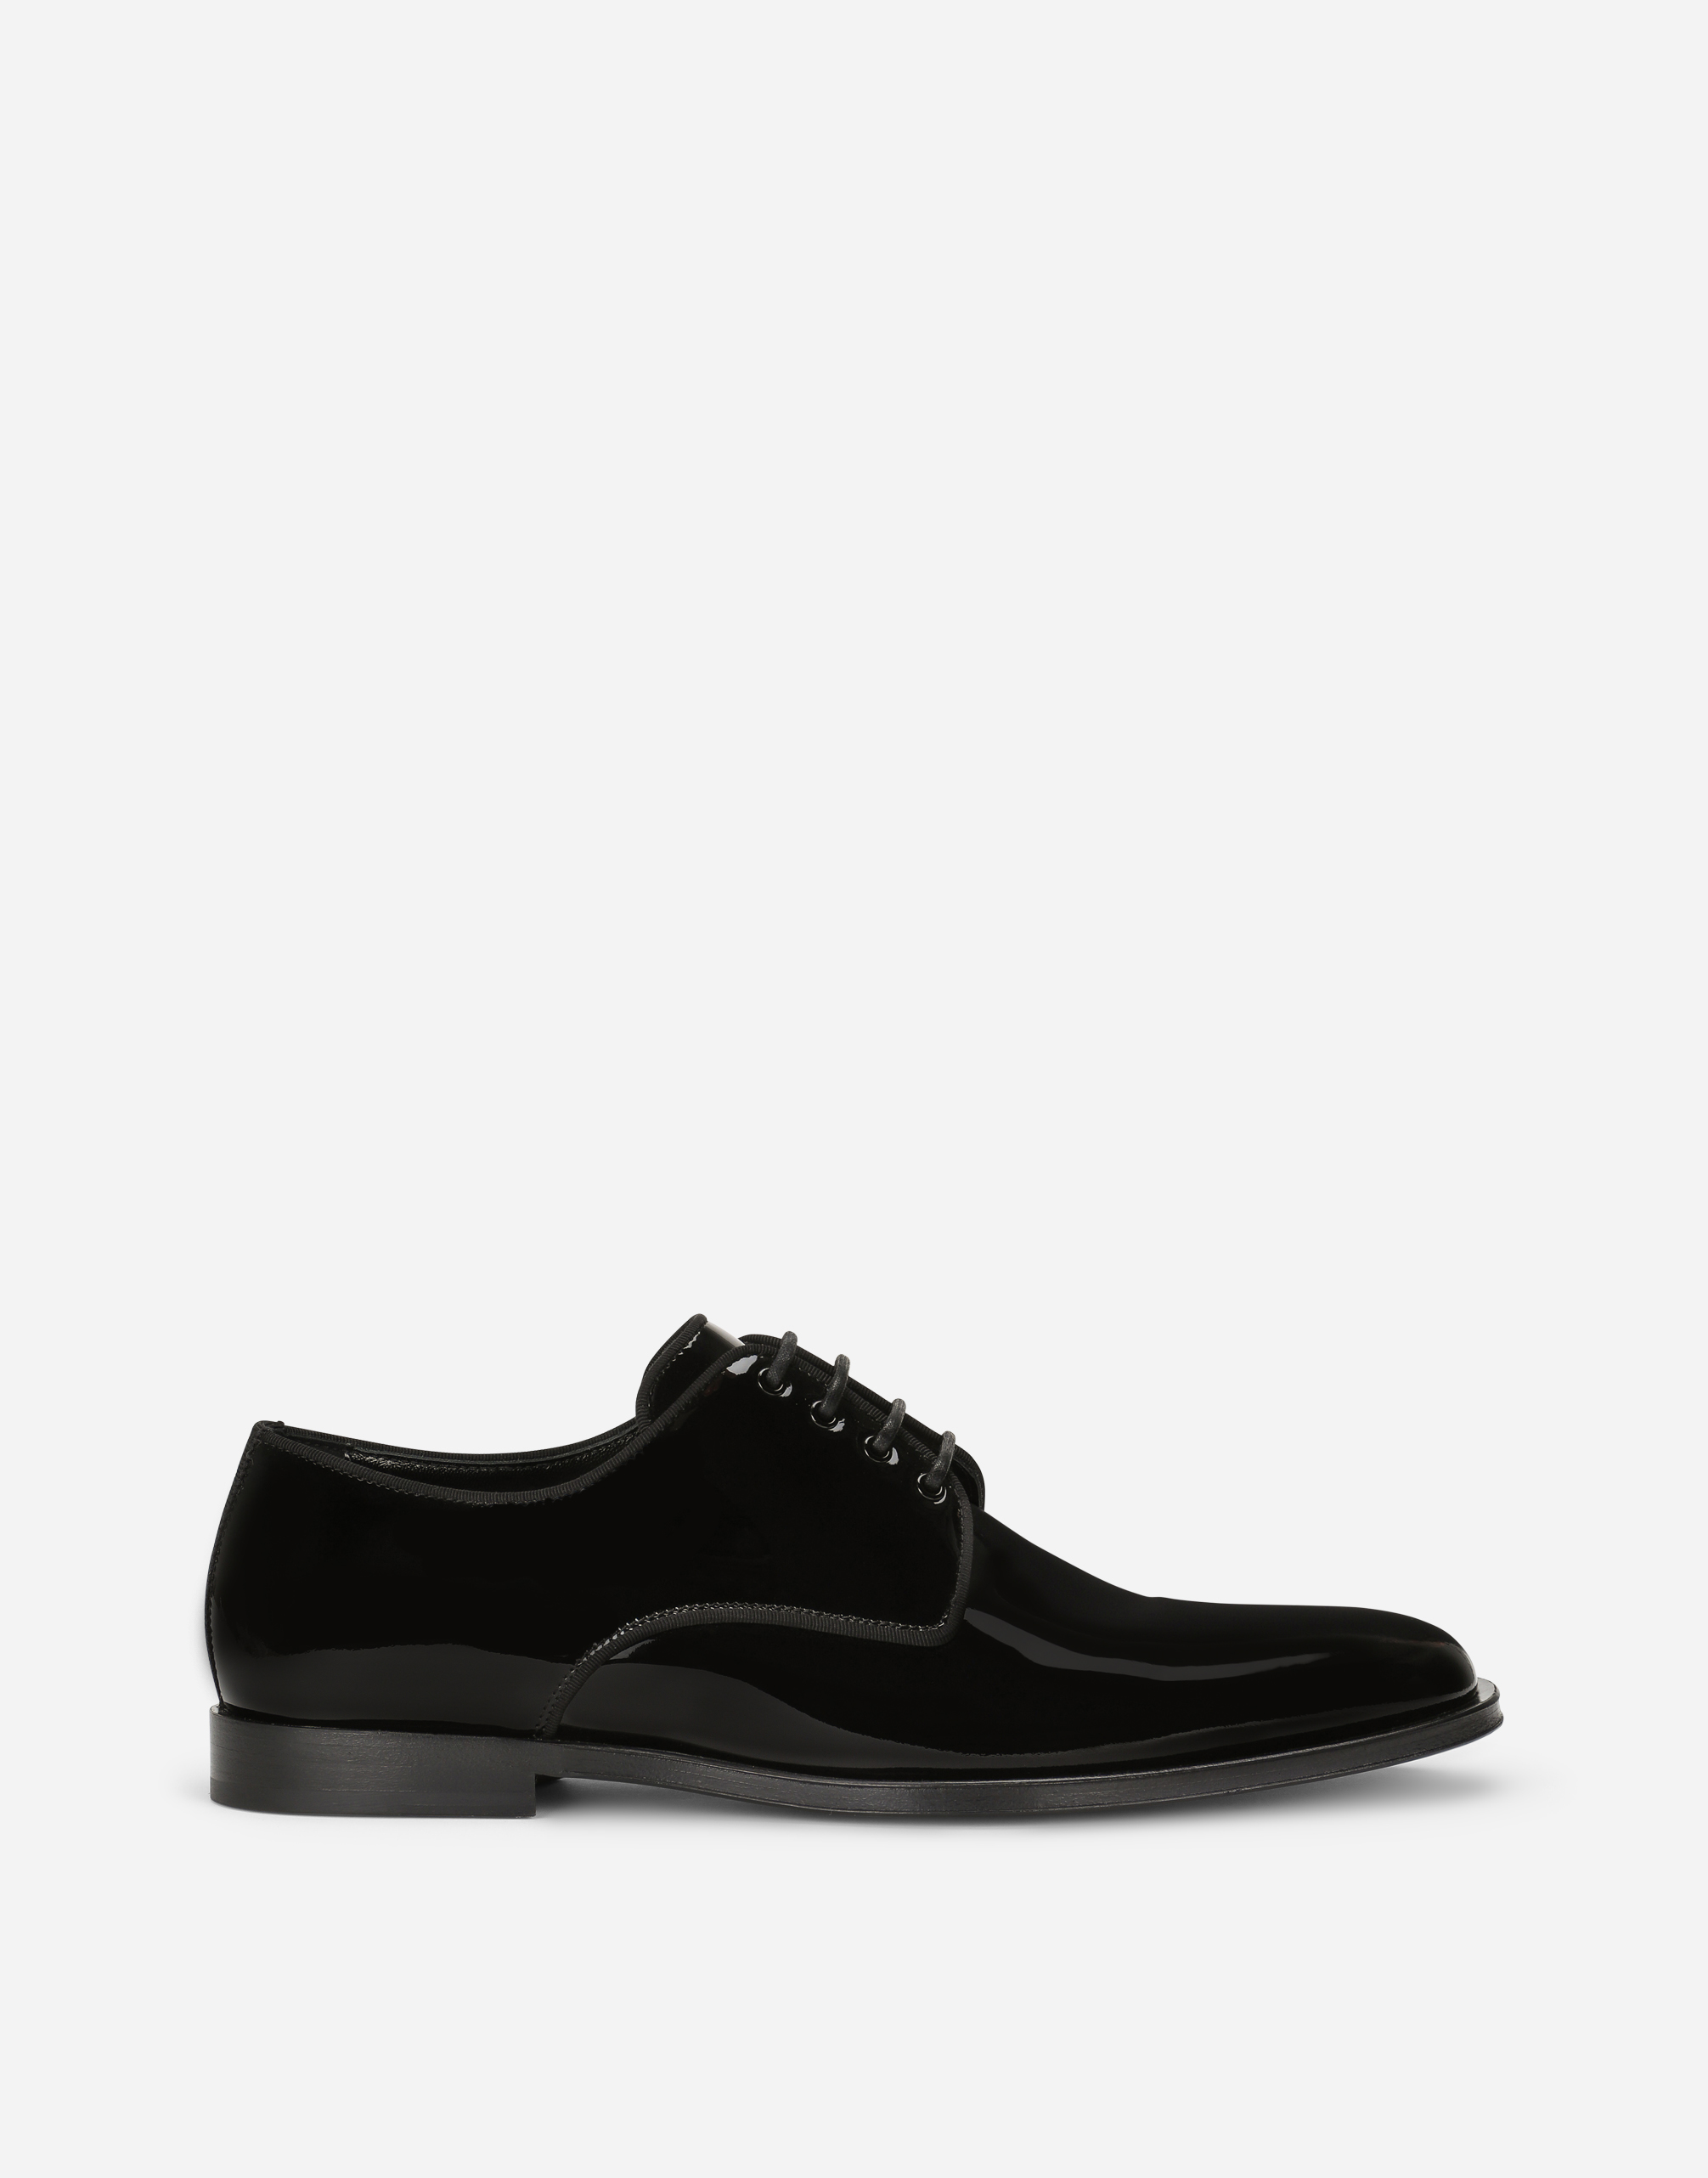 Corresponding to Orphan Duchess Glossy patent leather derby shoes in Black for Men | Dolce&Gabbana®